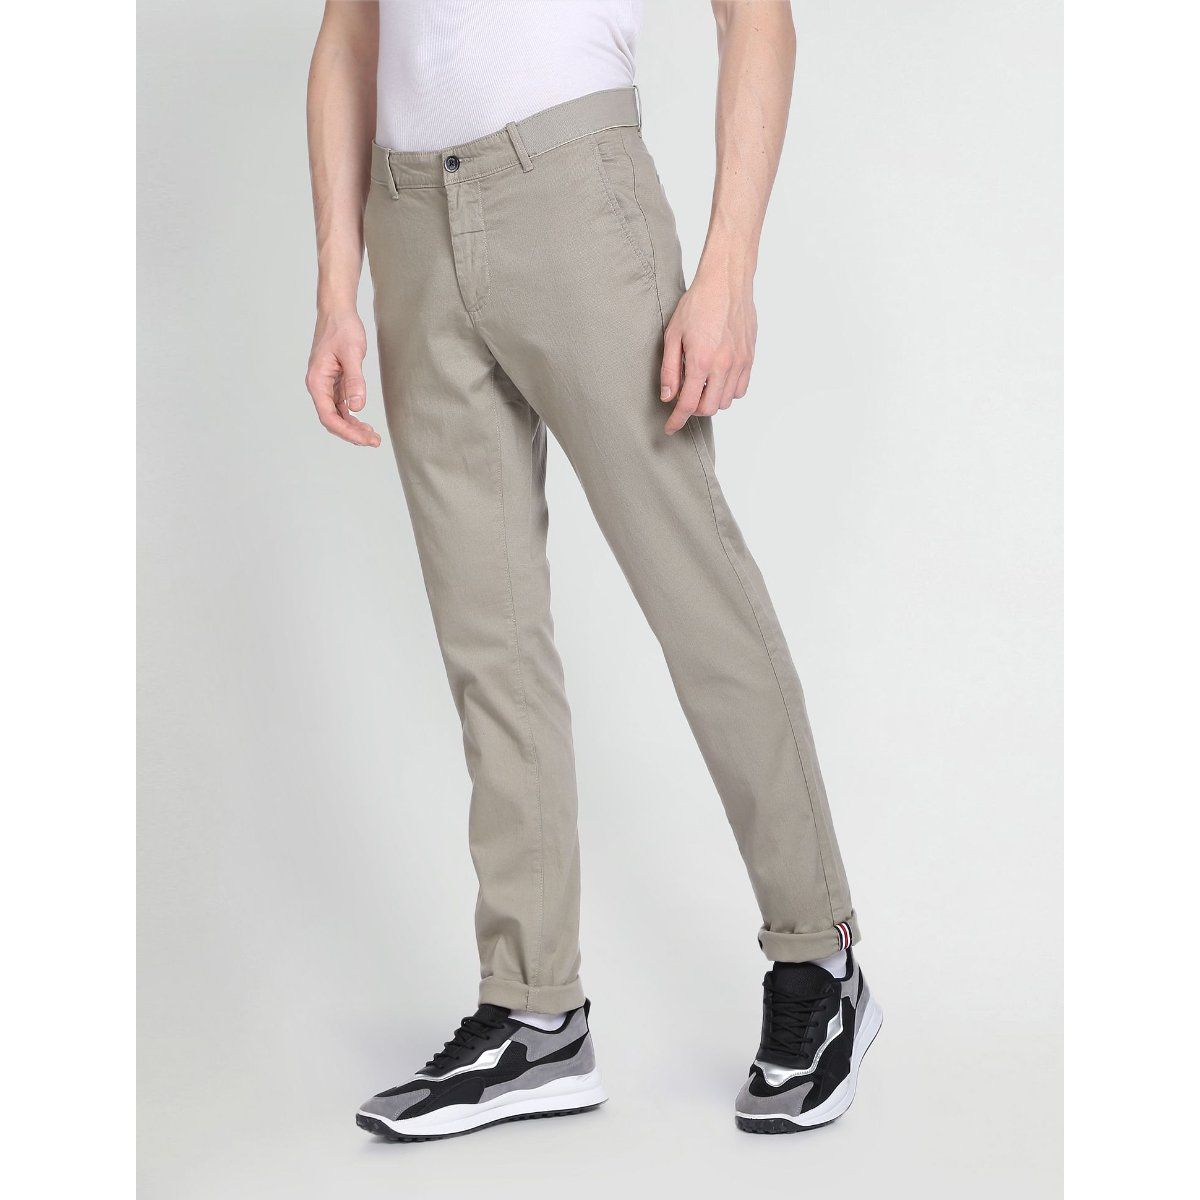 Arrow Sports Green Bronson Slim Fit Printed Casual Trousers Buy Arrow  Sports Green Bronson Slim Fit Printed Casual Trousers Online at Best Price  in India  NykaaMan